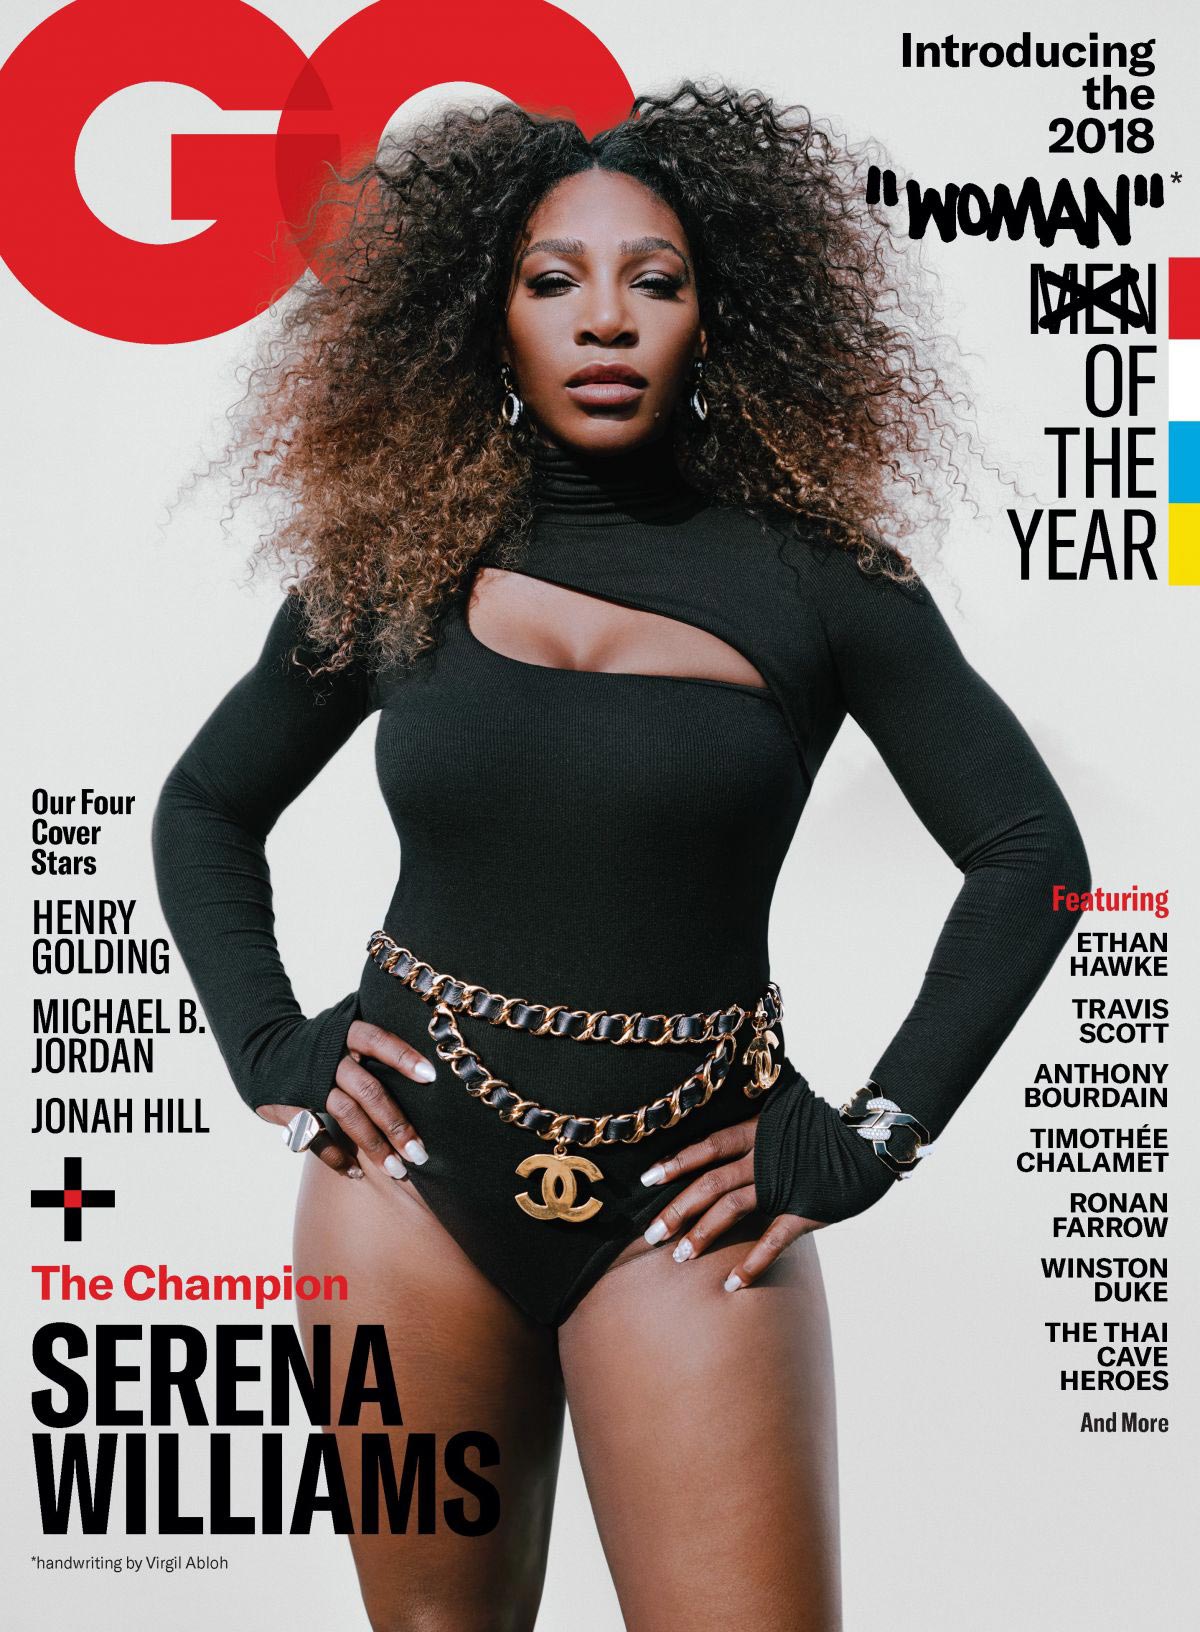 Serena Williams on The Cover of GQ 2018 Women of The Year Issue